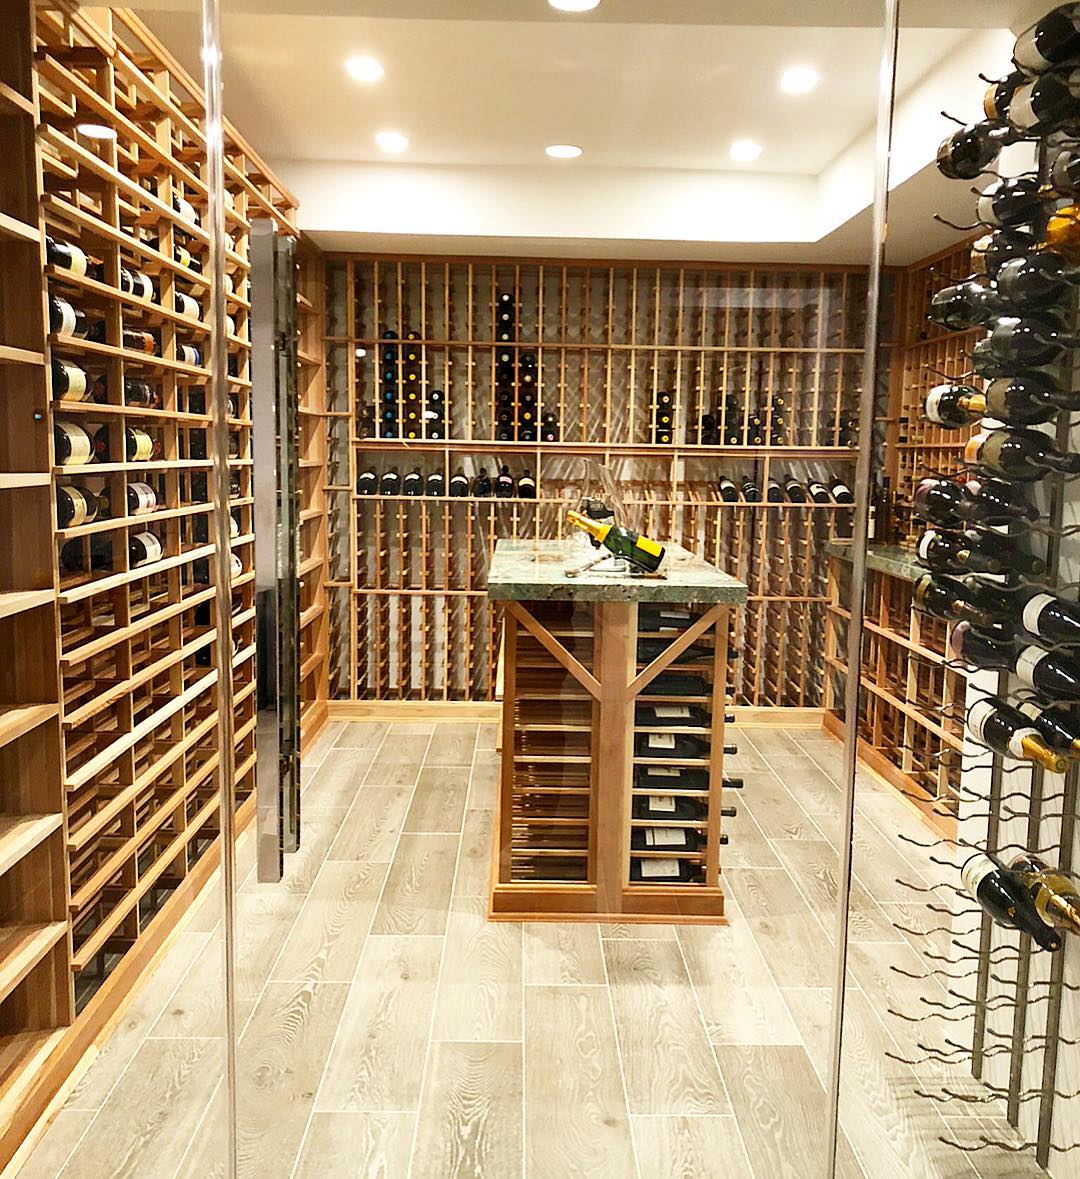 Wine Room with a Wood Tasting Table in the Center. Photo by Instagram user @mercer.built